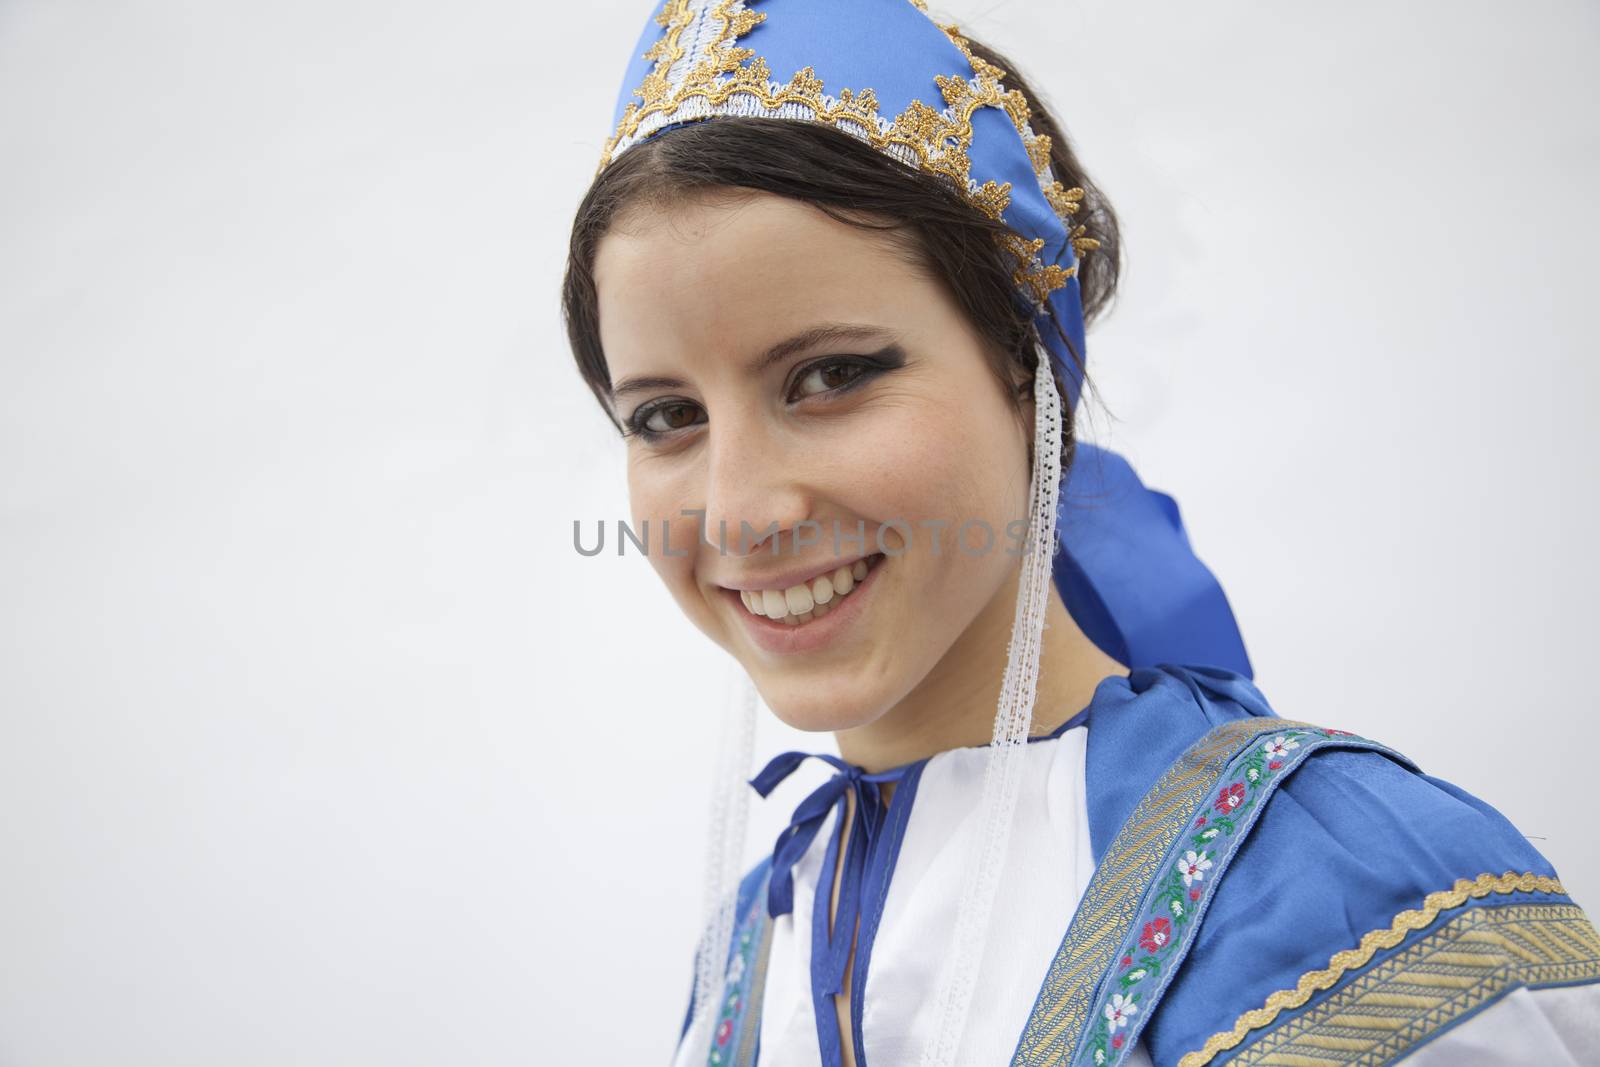 Portrait of young smiling woman in traditional clothing from Russia, studio shot by XiXinXing